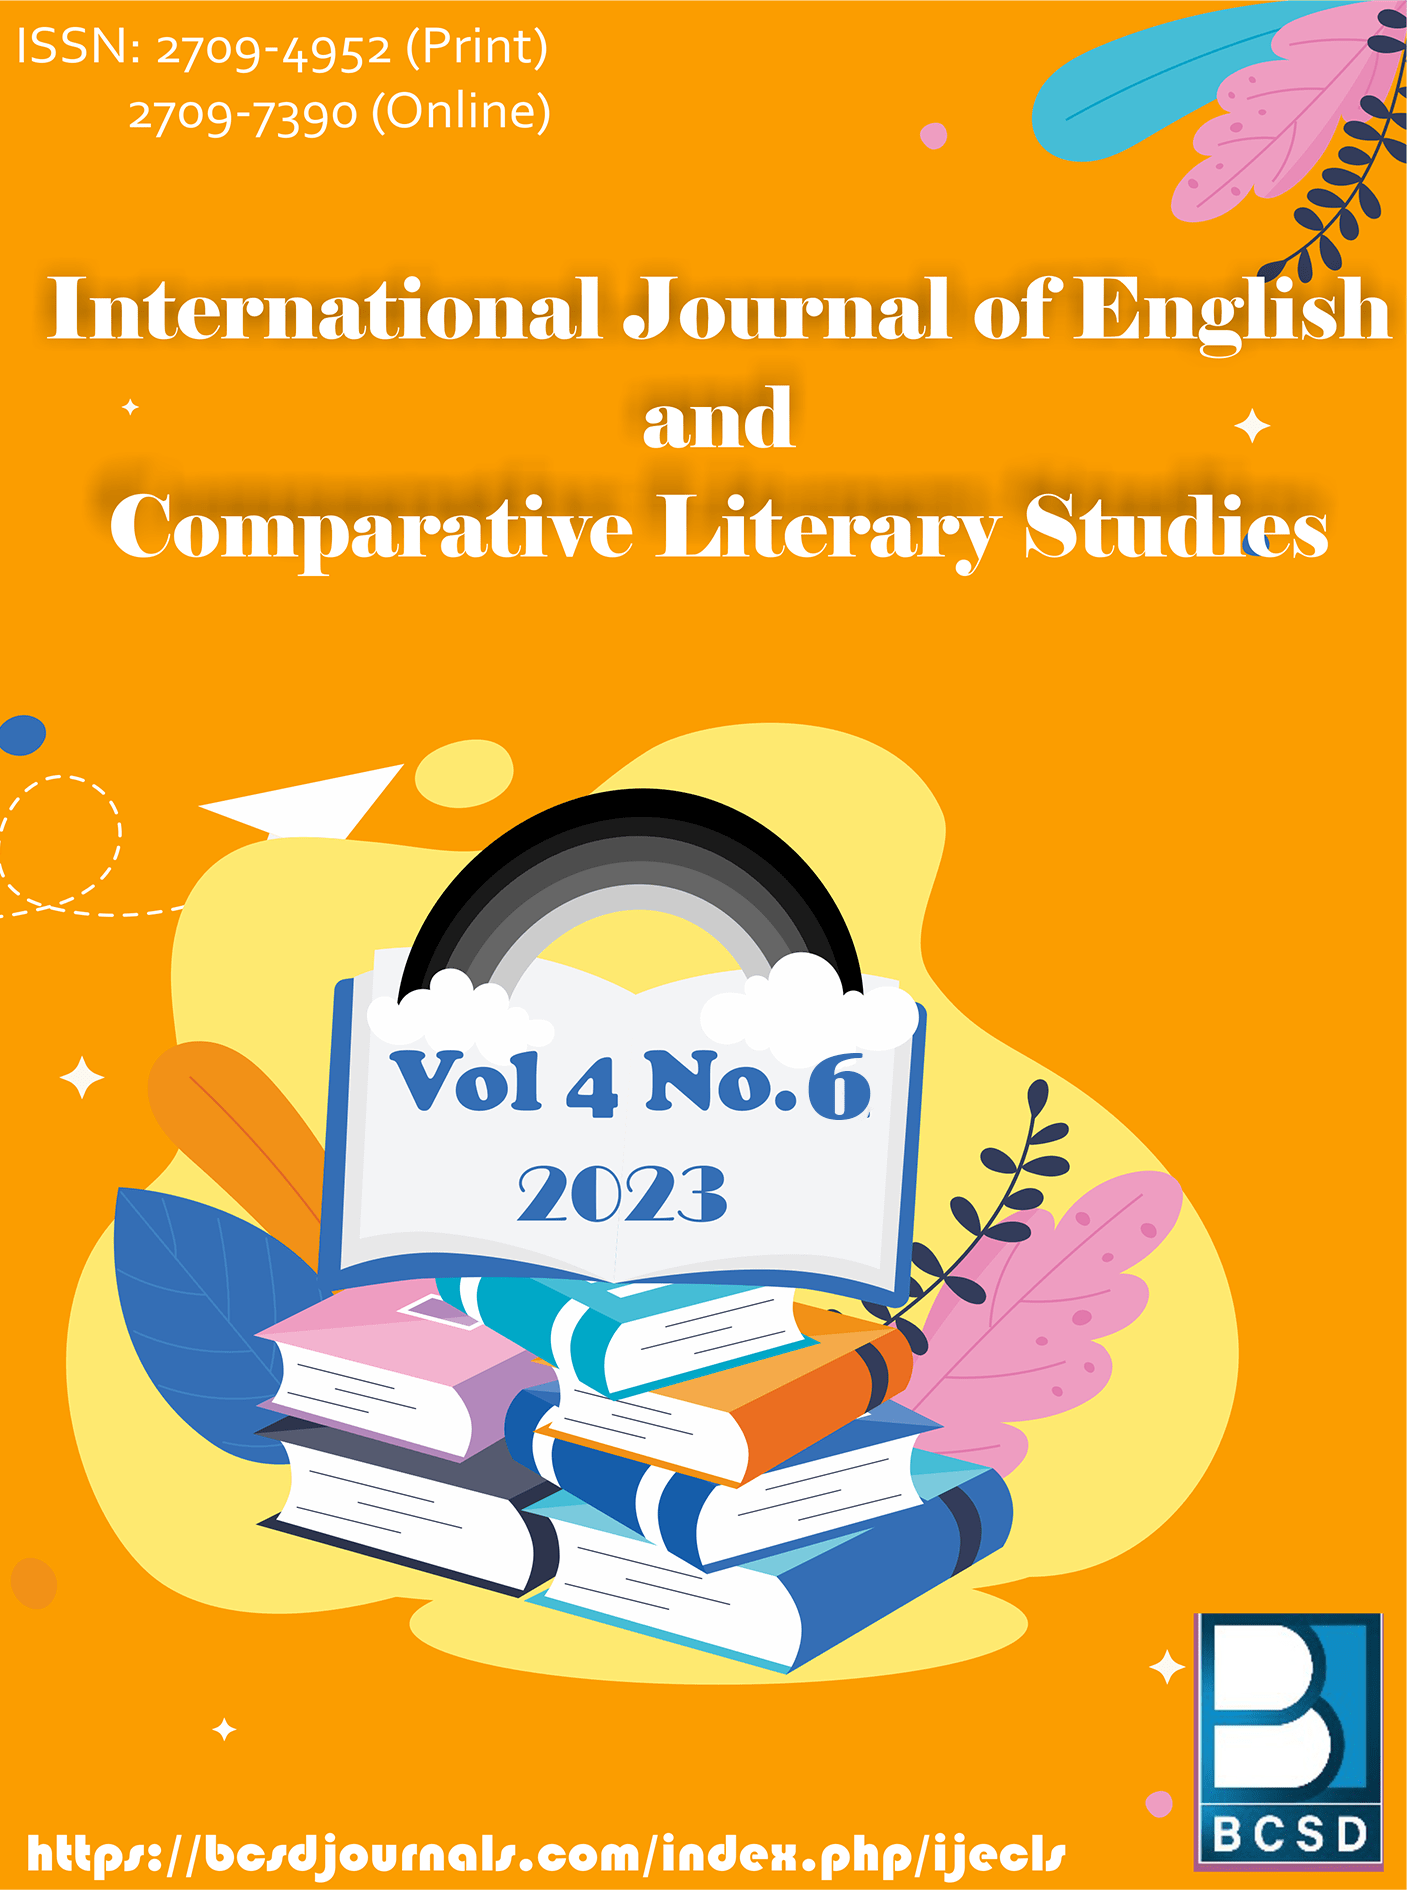 International Journal of English and Comparative Literary Studies